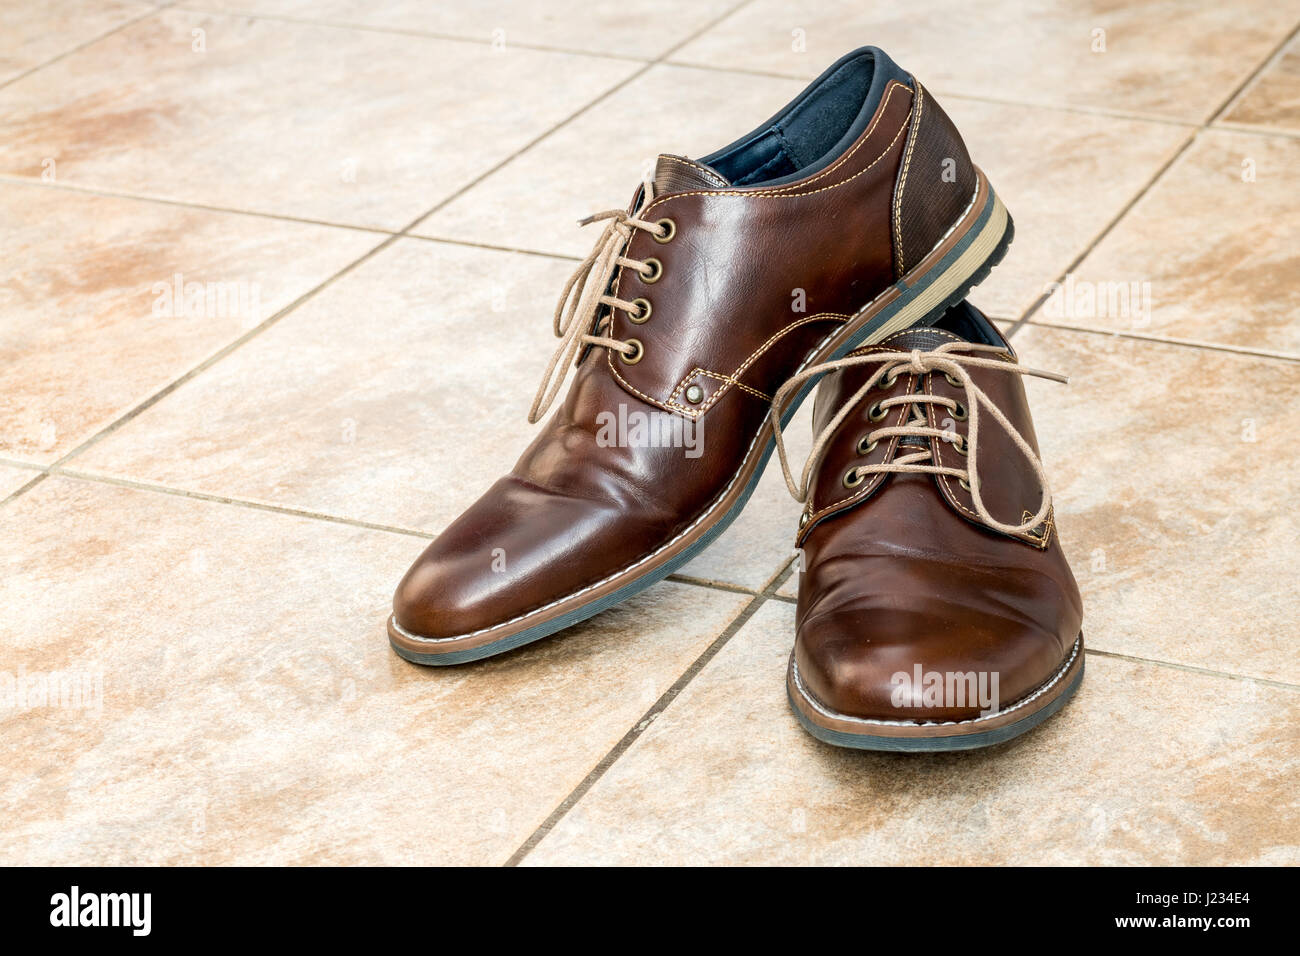 Pair of fashion brown men's shoes with shoestring on a light brown ceramic tiles Stock Photo